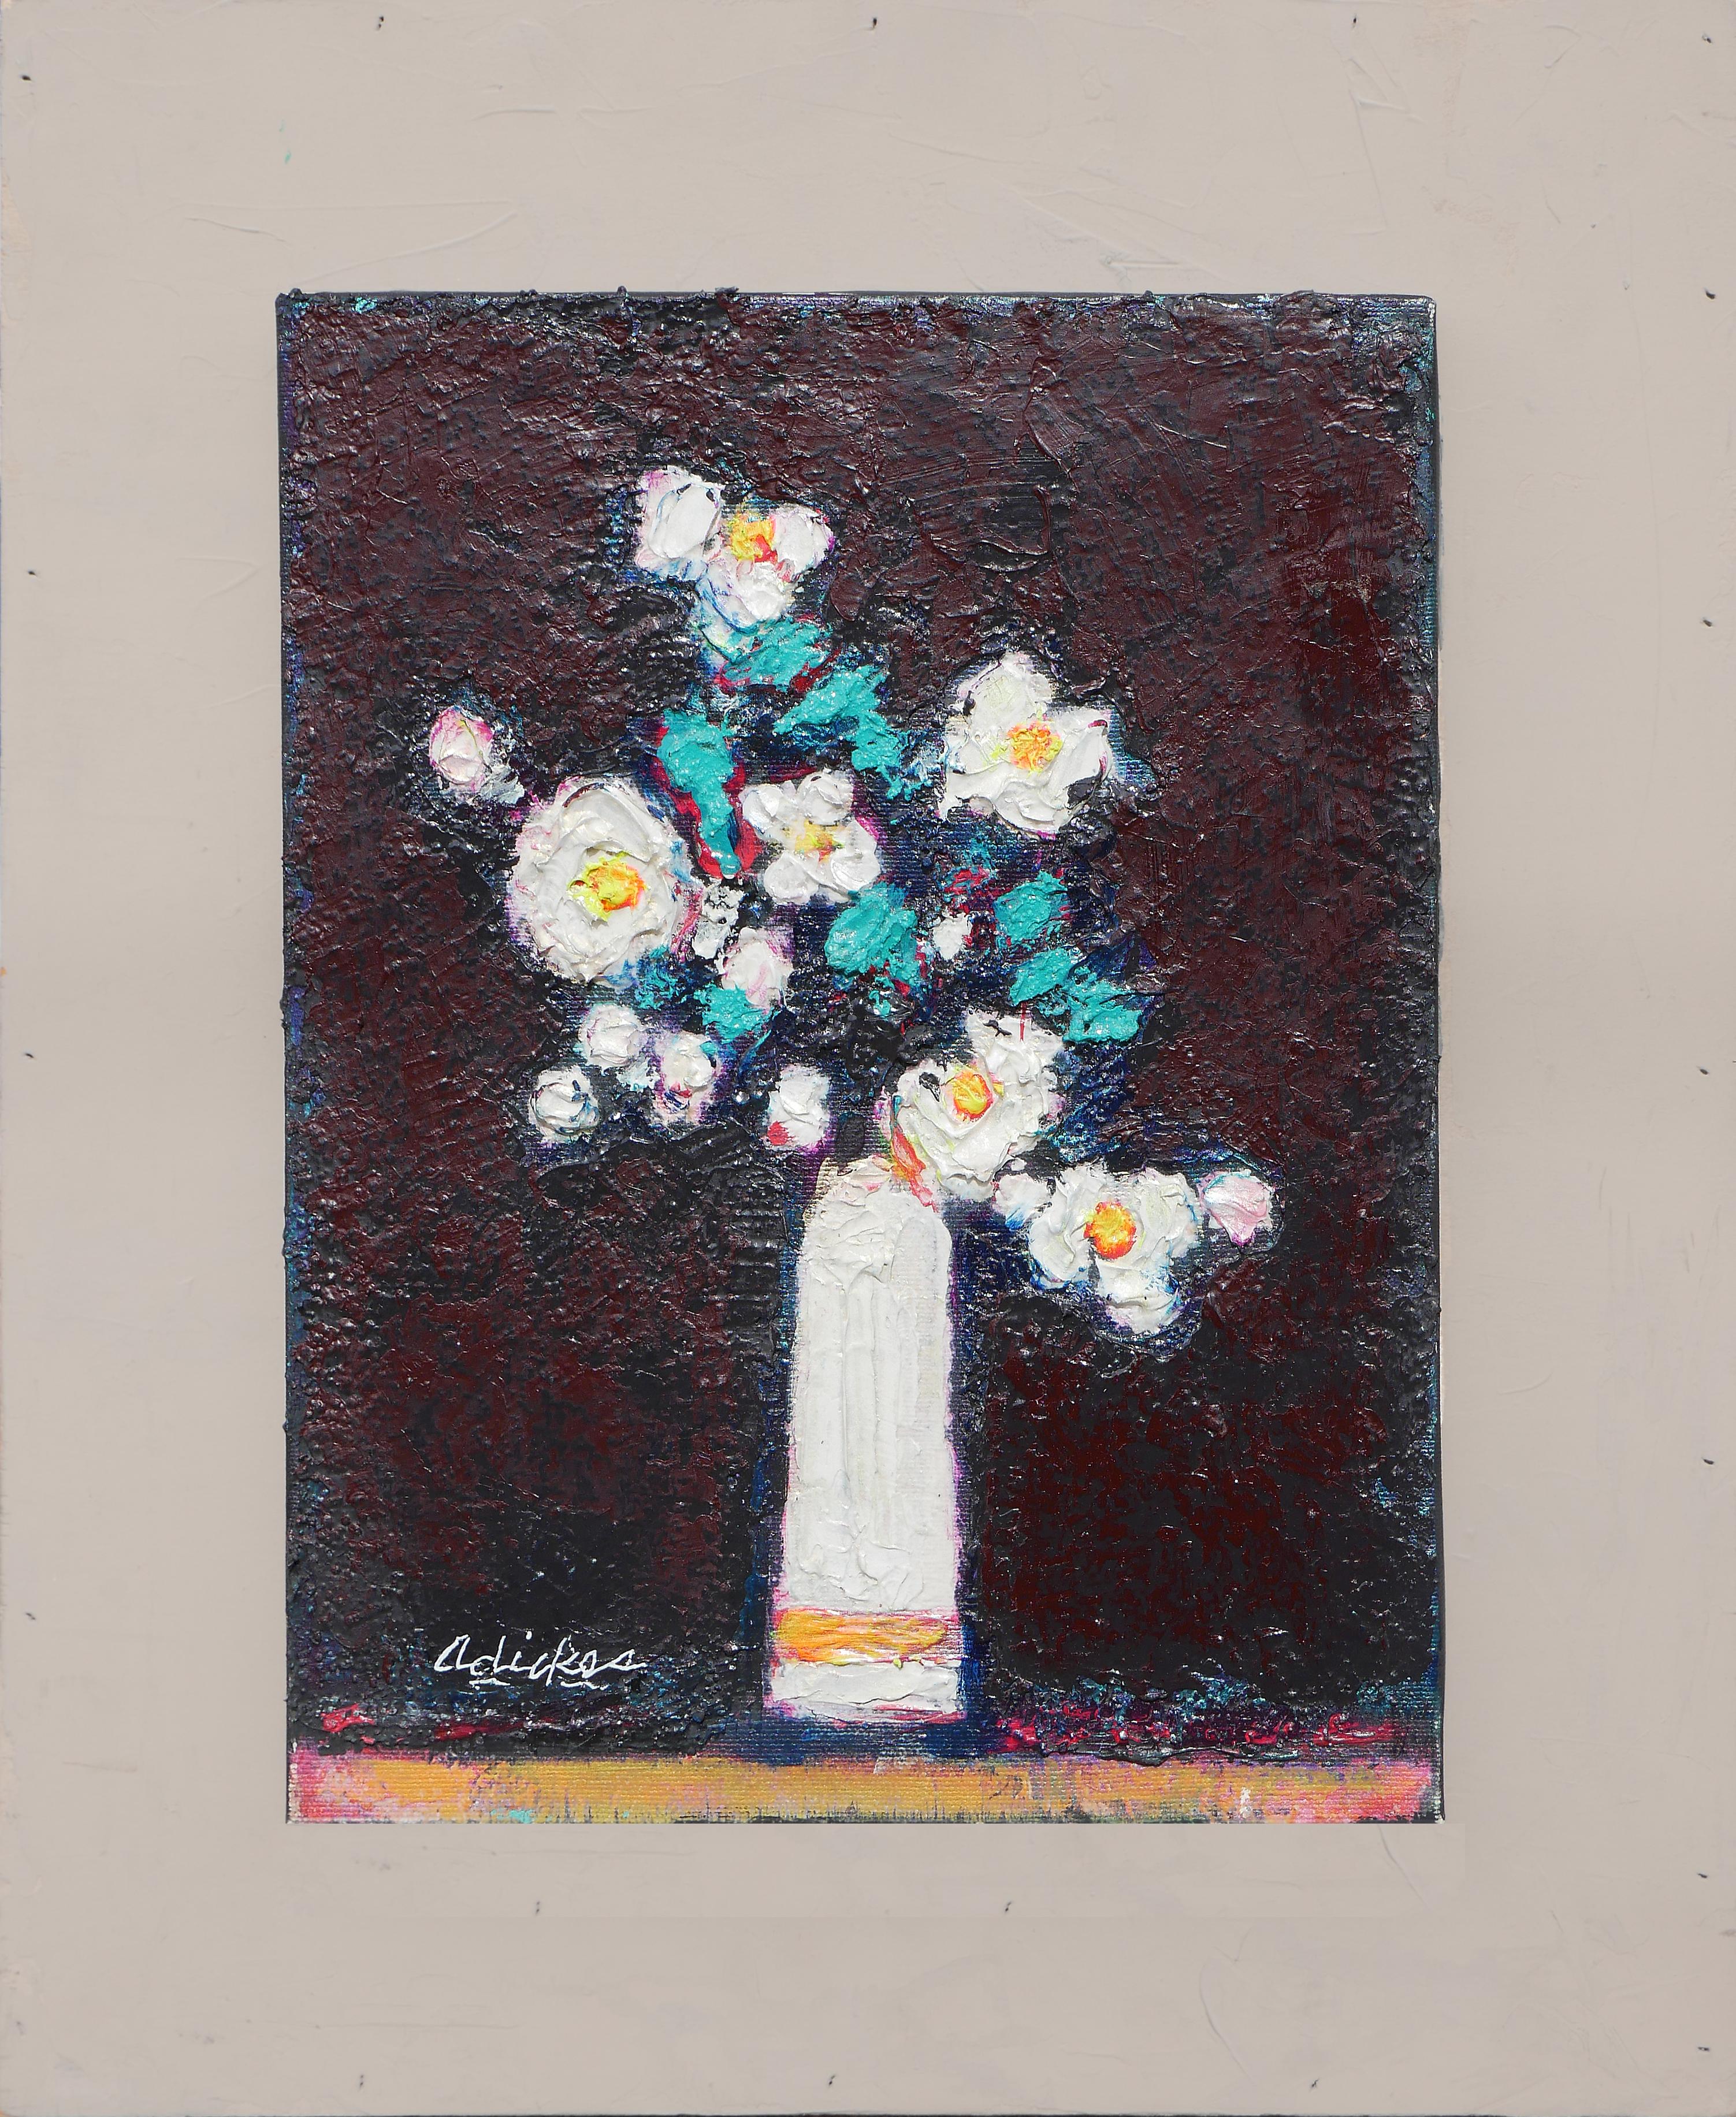 David Adickes Abstract Painting - "White Flowers, White Vase" Modern Abstract Floral Still Life Painting of Daises